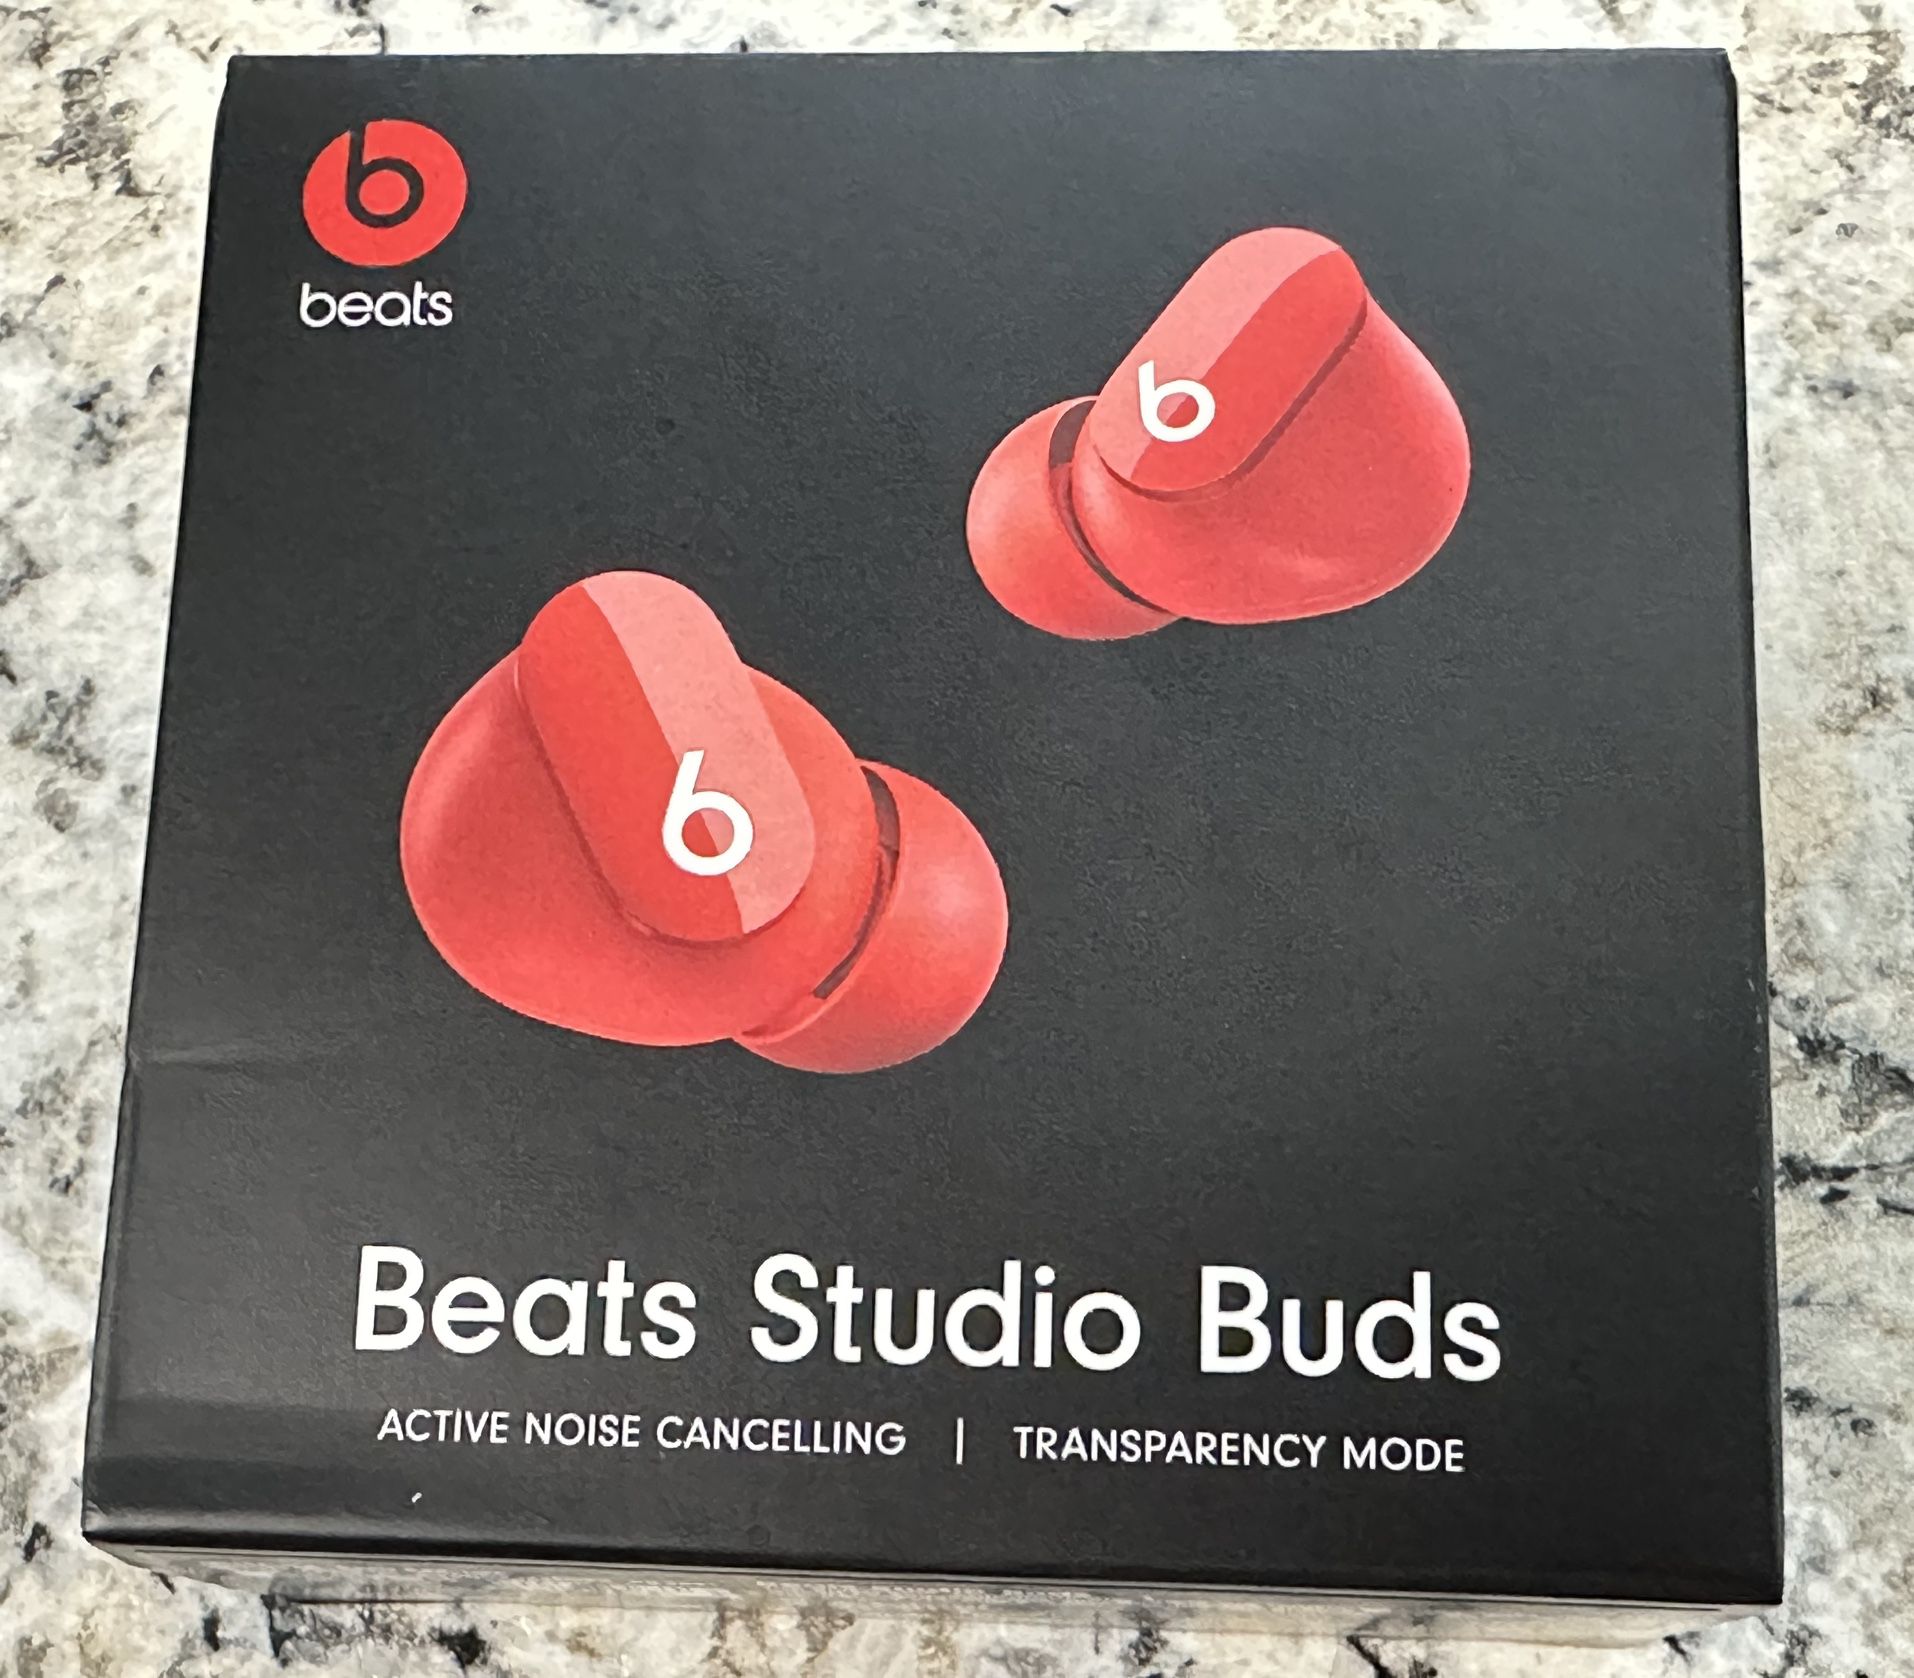 NEW! Beats Studio Buds Totally Wireless Noise Cancelling Earphones - Red